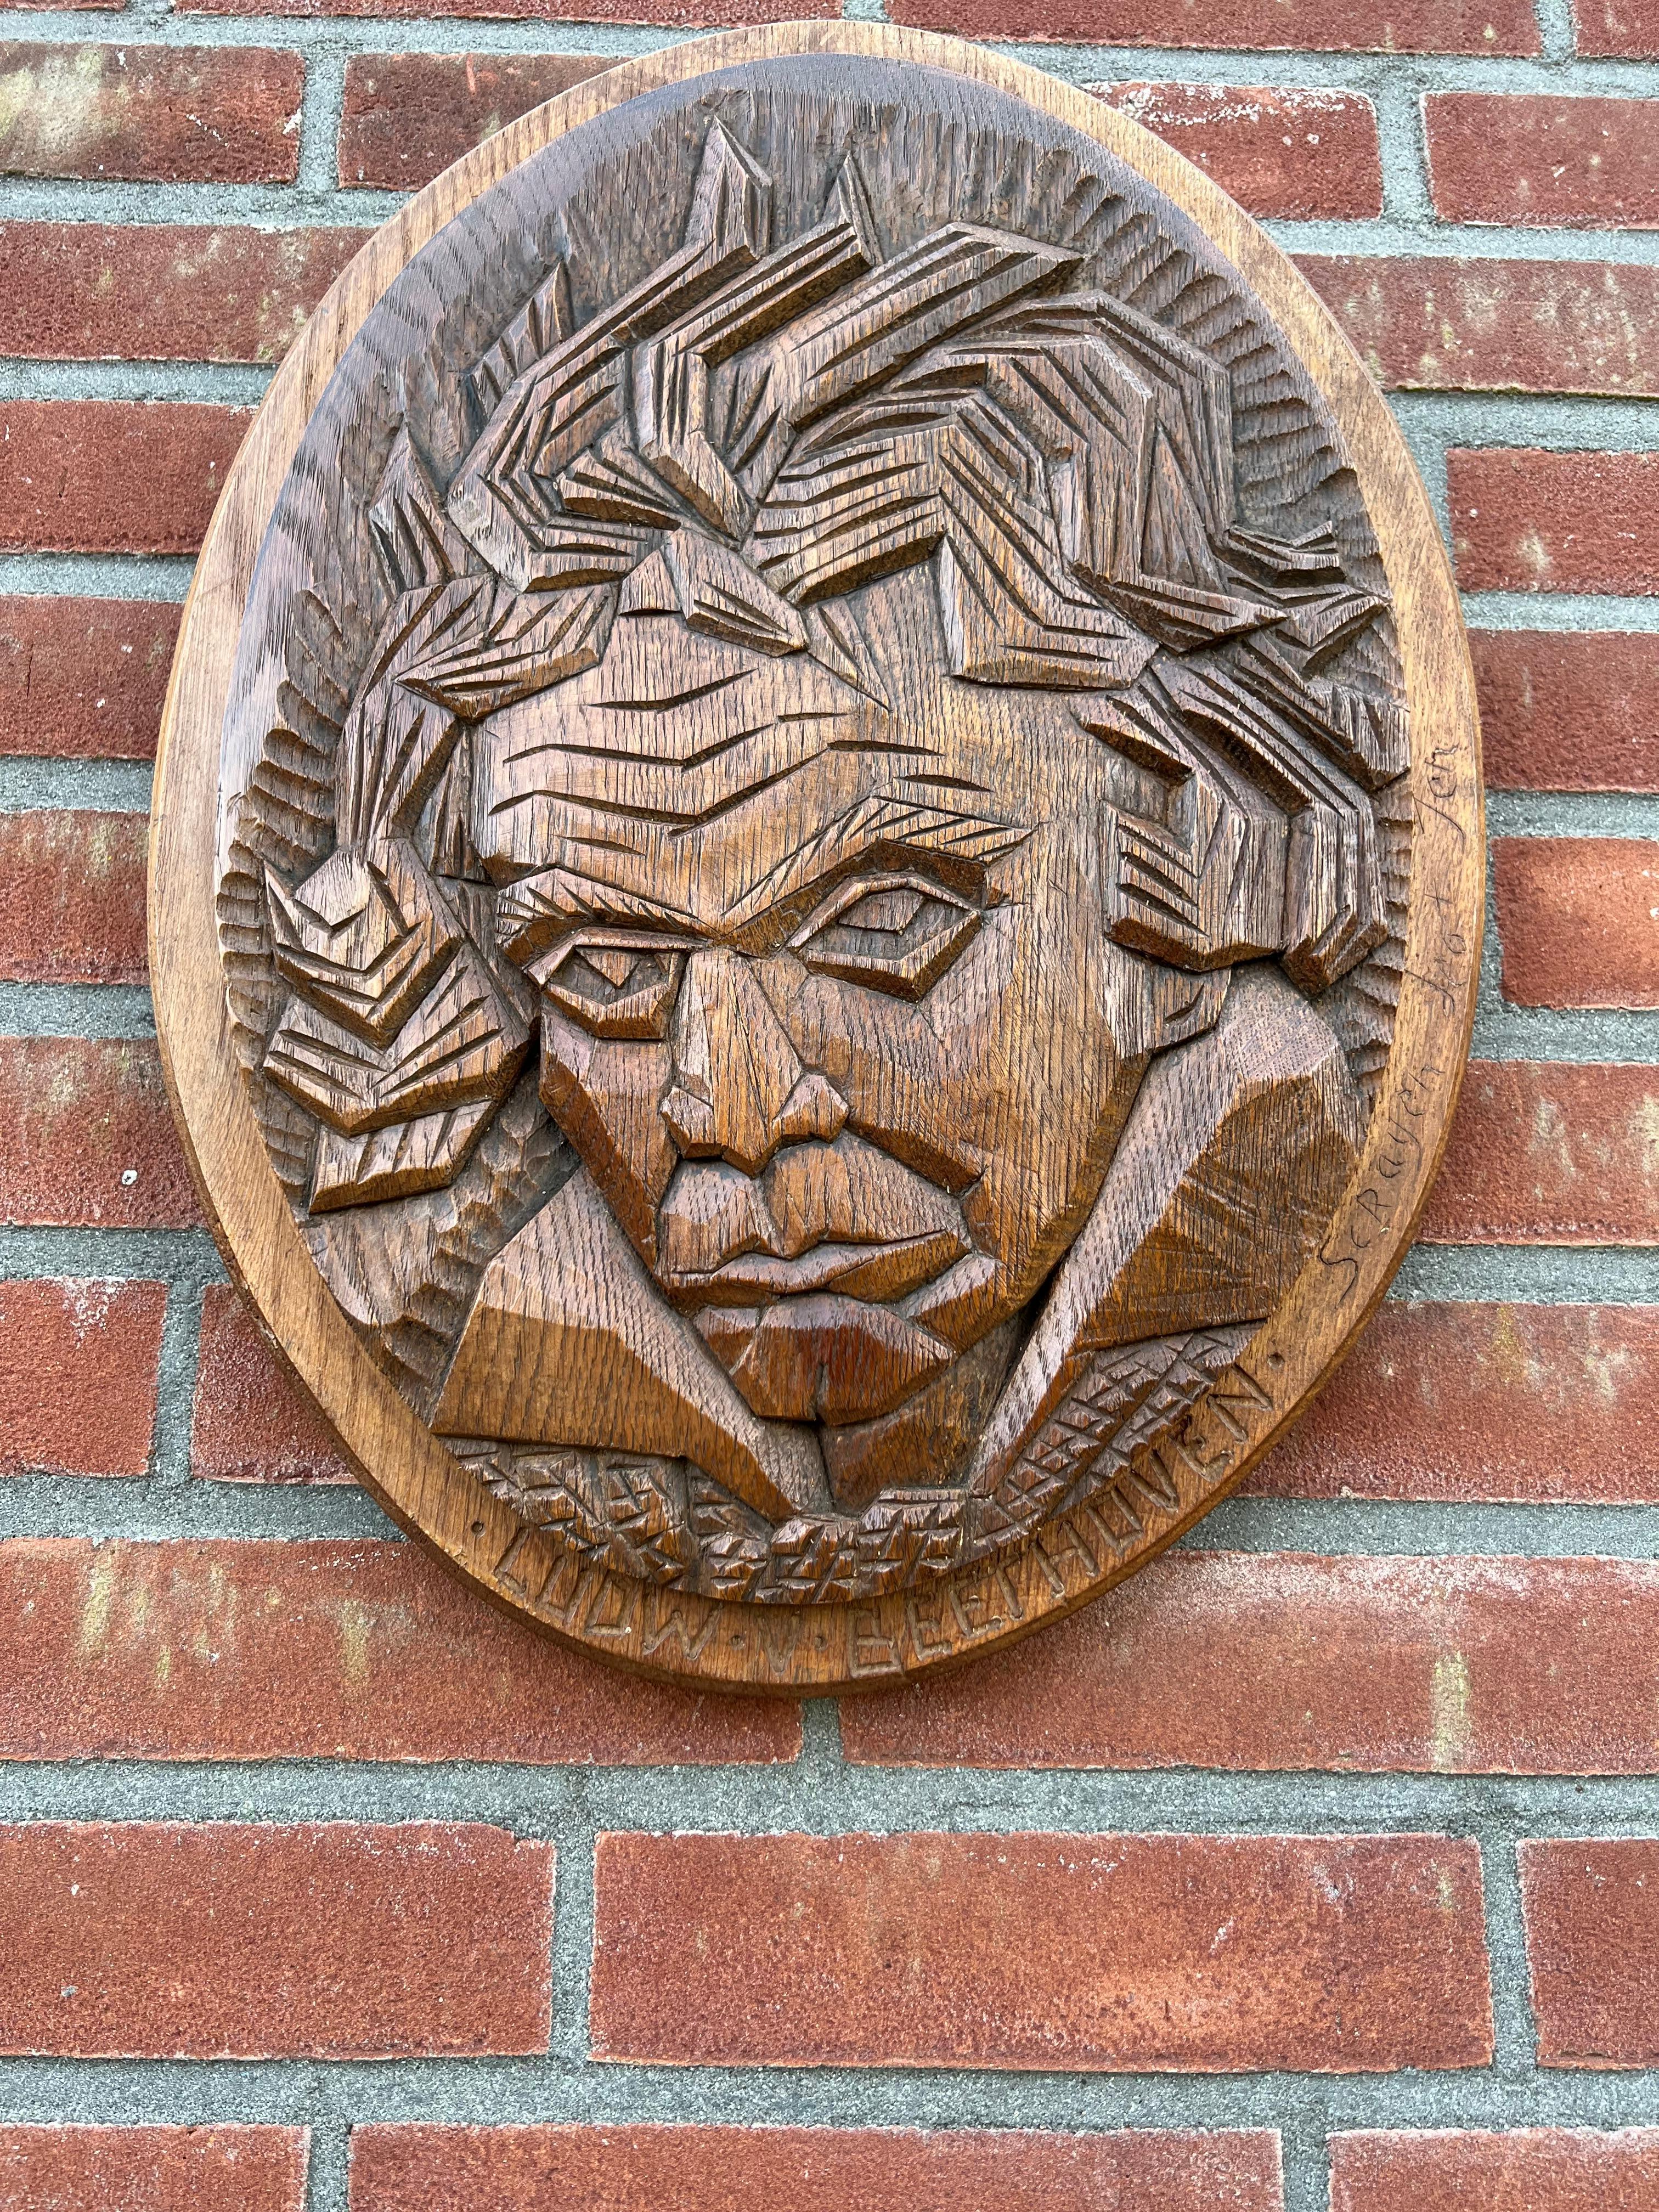 Hand-Crafted Rare Geometric Art, Hand Carved Oak Ludwig van Beethoven Mask Medallion / Plaque For Sale